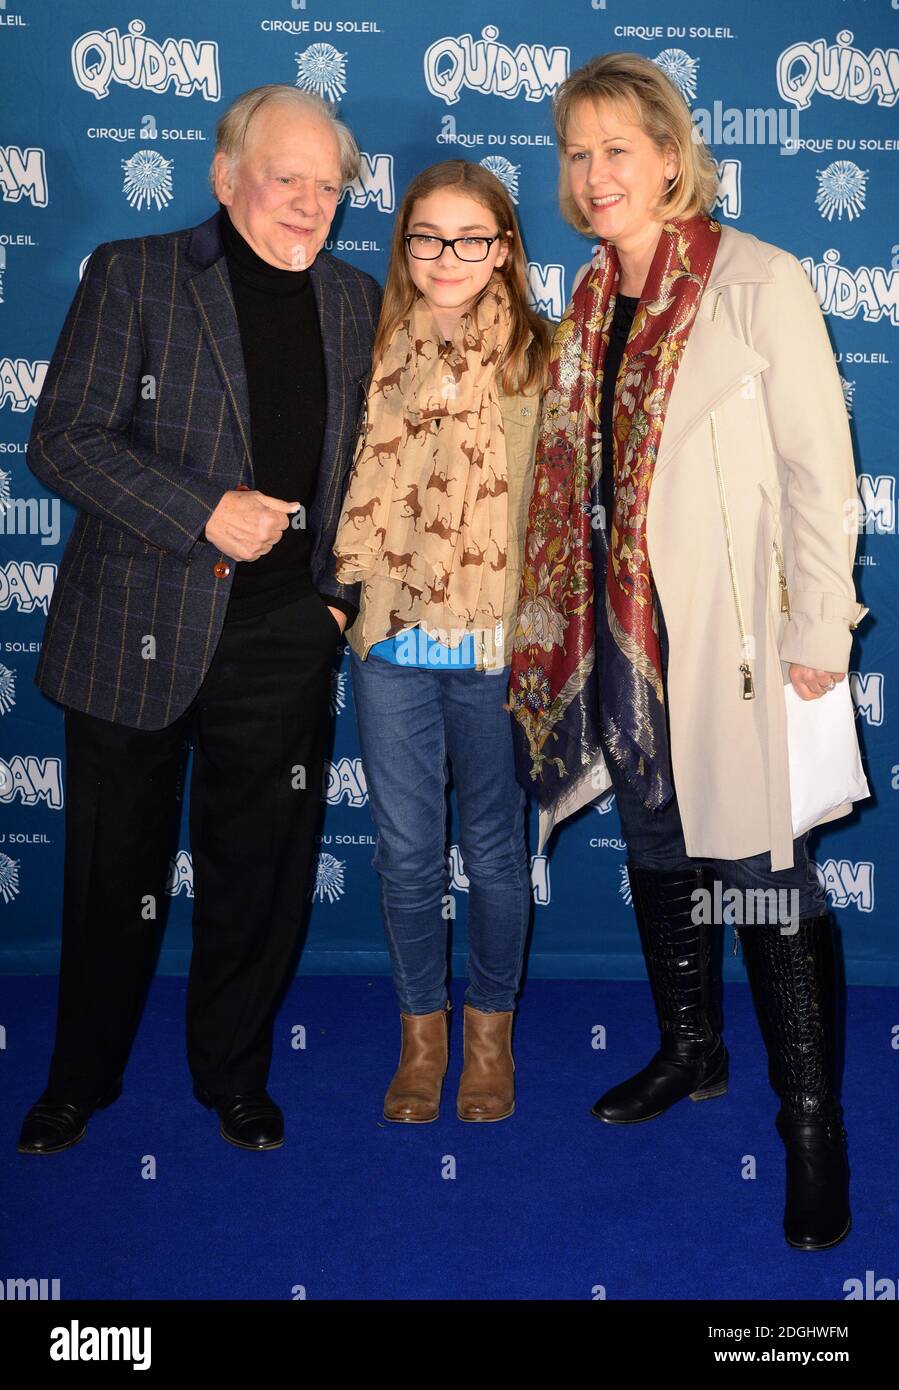 Sir David Jason with his daughter Sophie Mae and wife Gill Hinchcliffe  arriving at the opening night of Cirque du Soleil's Quidam at the Royal  Albert Hall, London Stock Photo - Alamy